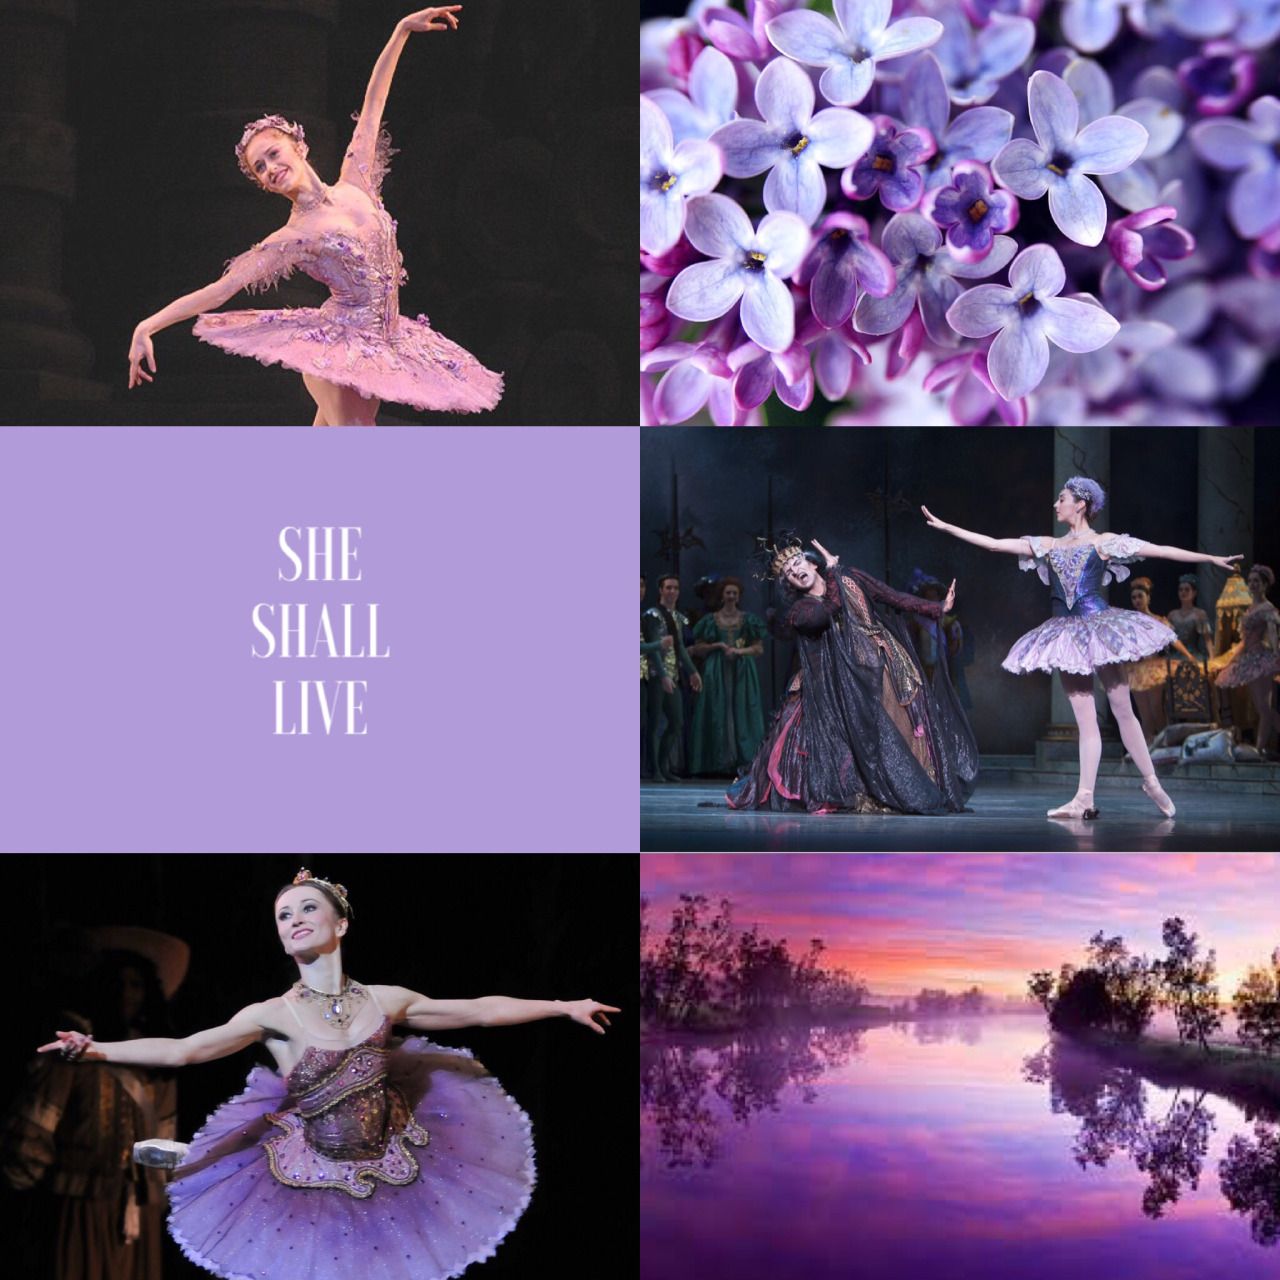 Aesthetic ↳ The Lilac Fairy “She shall live”. Dance wallpaper, Dancing aesthetic, Dancing poses